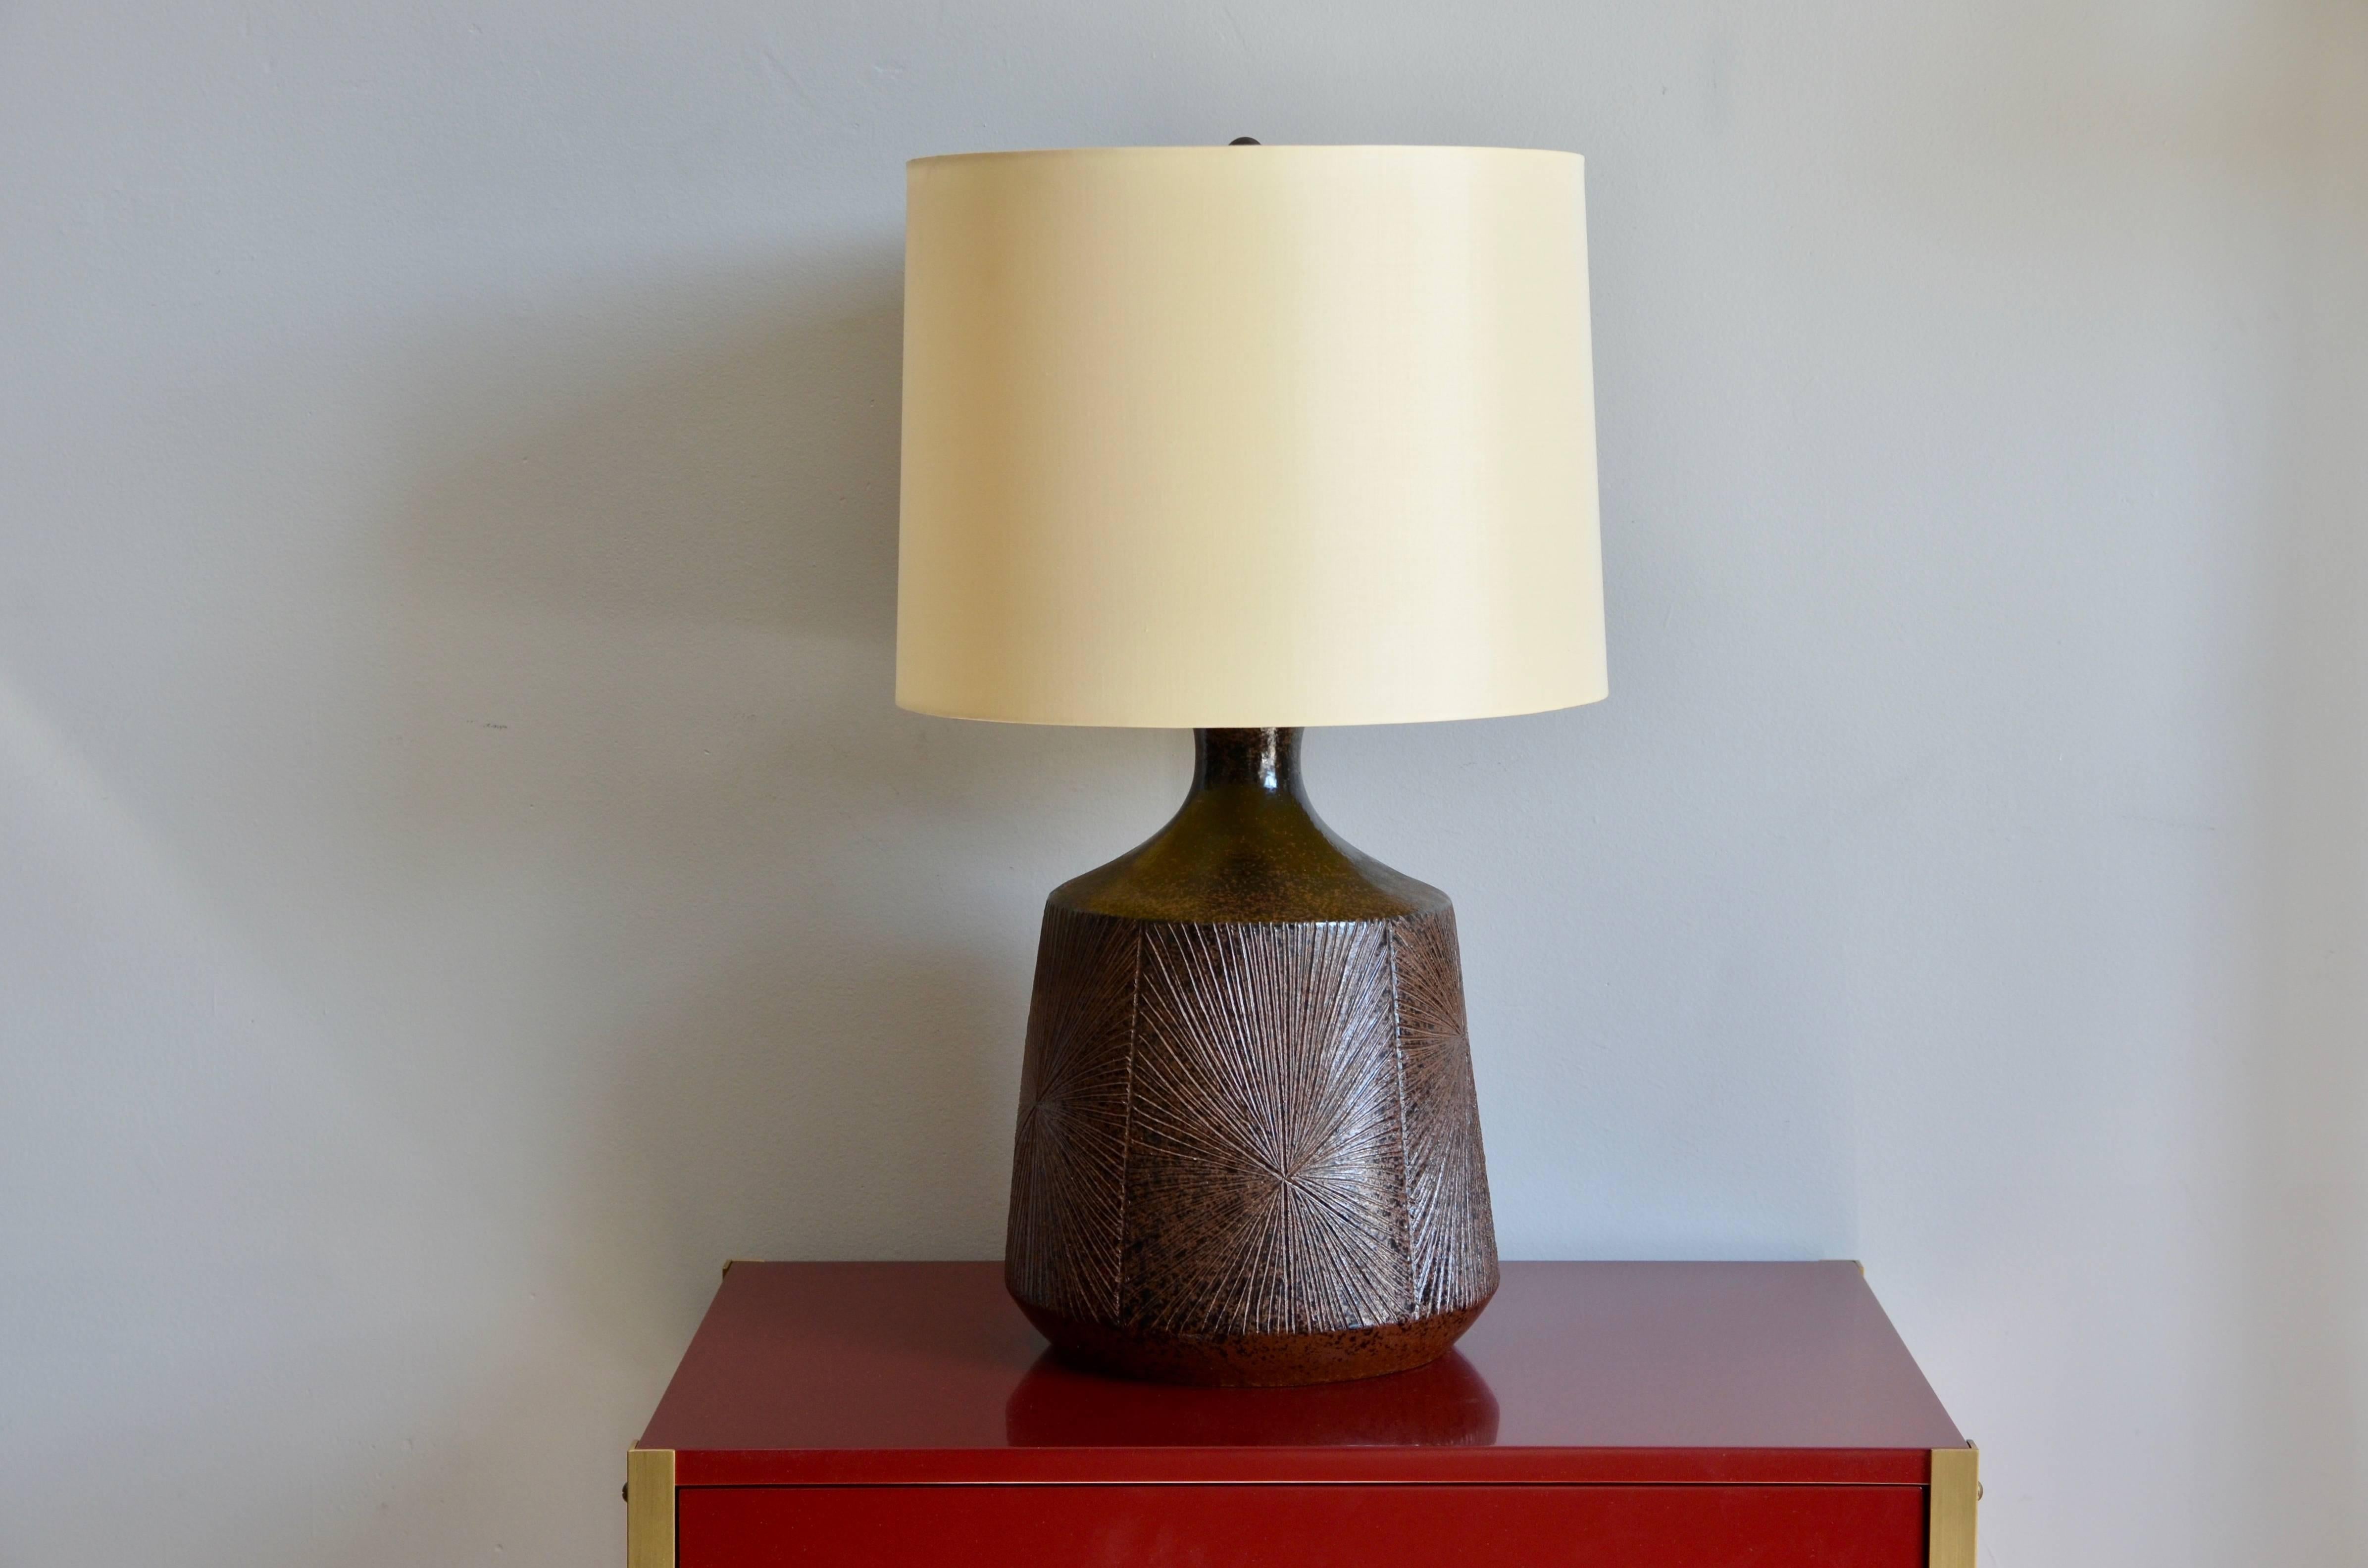 Rare Earthgender sunburst ceramic lamp by David Cressey and Robert Maxwell. 

Handmade Architectural Pottery with desirable incised Brutalist sunburst pattern.

New custom cream silk shade and diffuser (the shade is 15 in diameter at top x 16